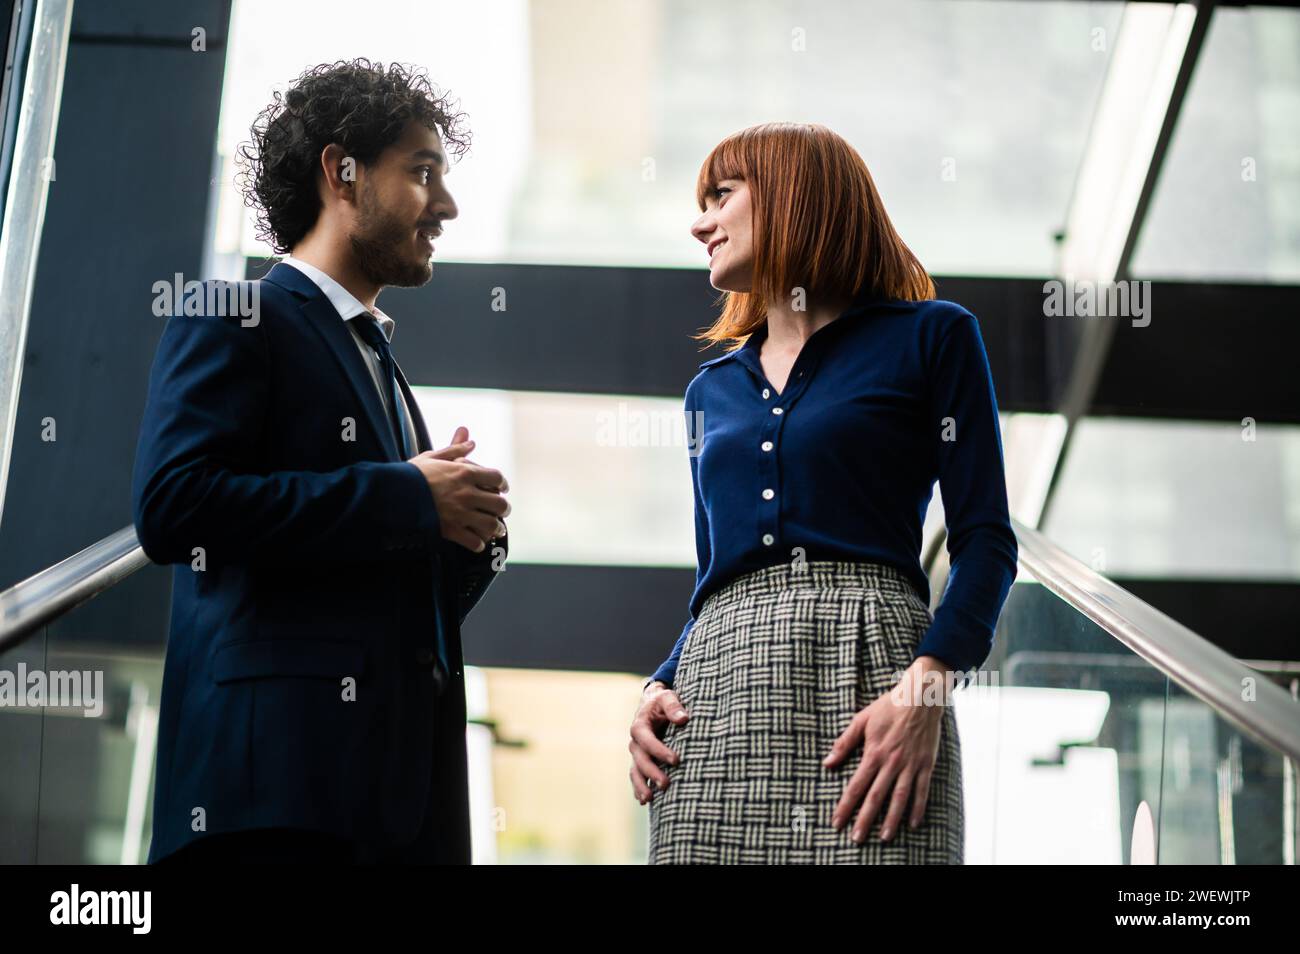 Business partners discussing together outdoor in a modern urban setting Stock Photo